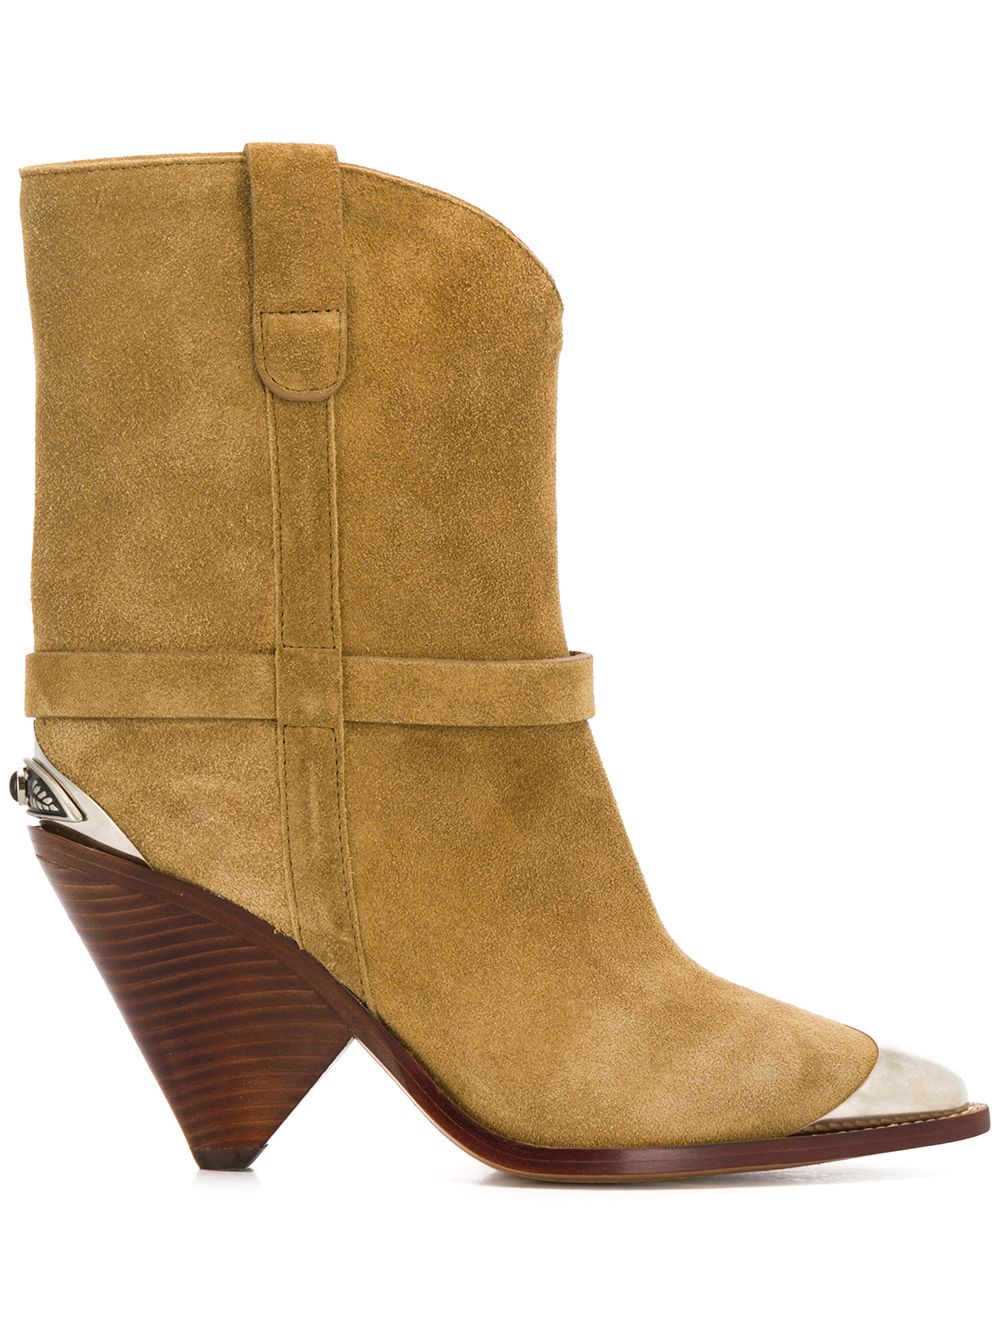 isabel marant lamsy suede ankle boots